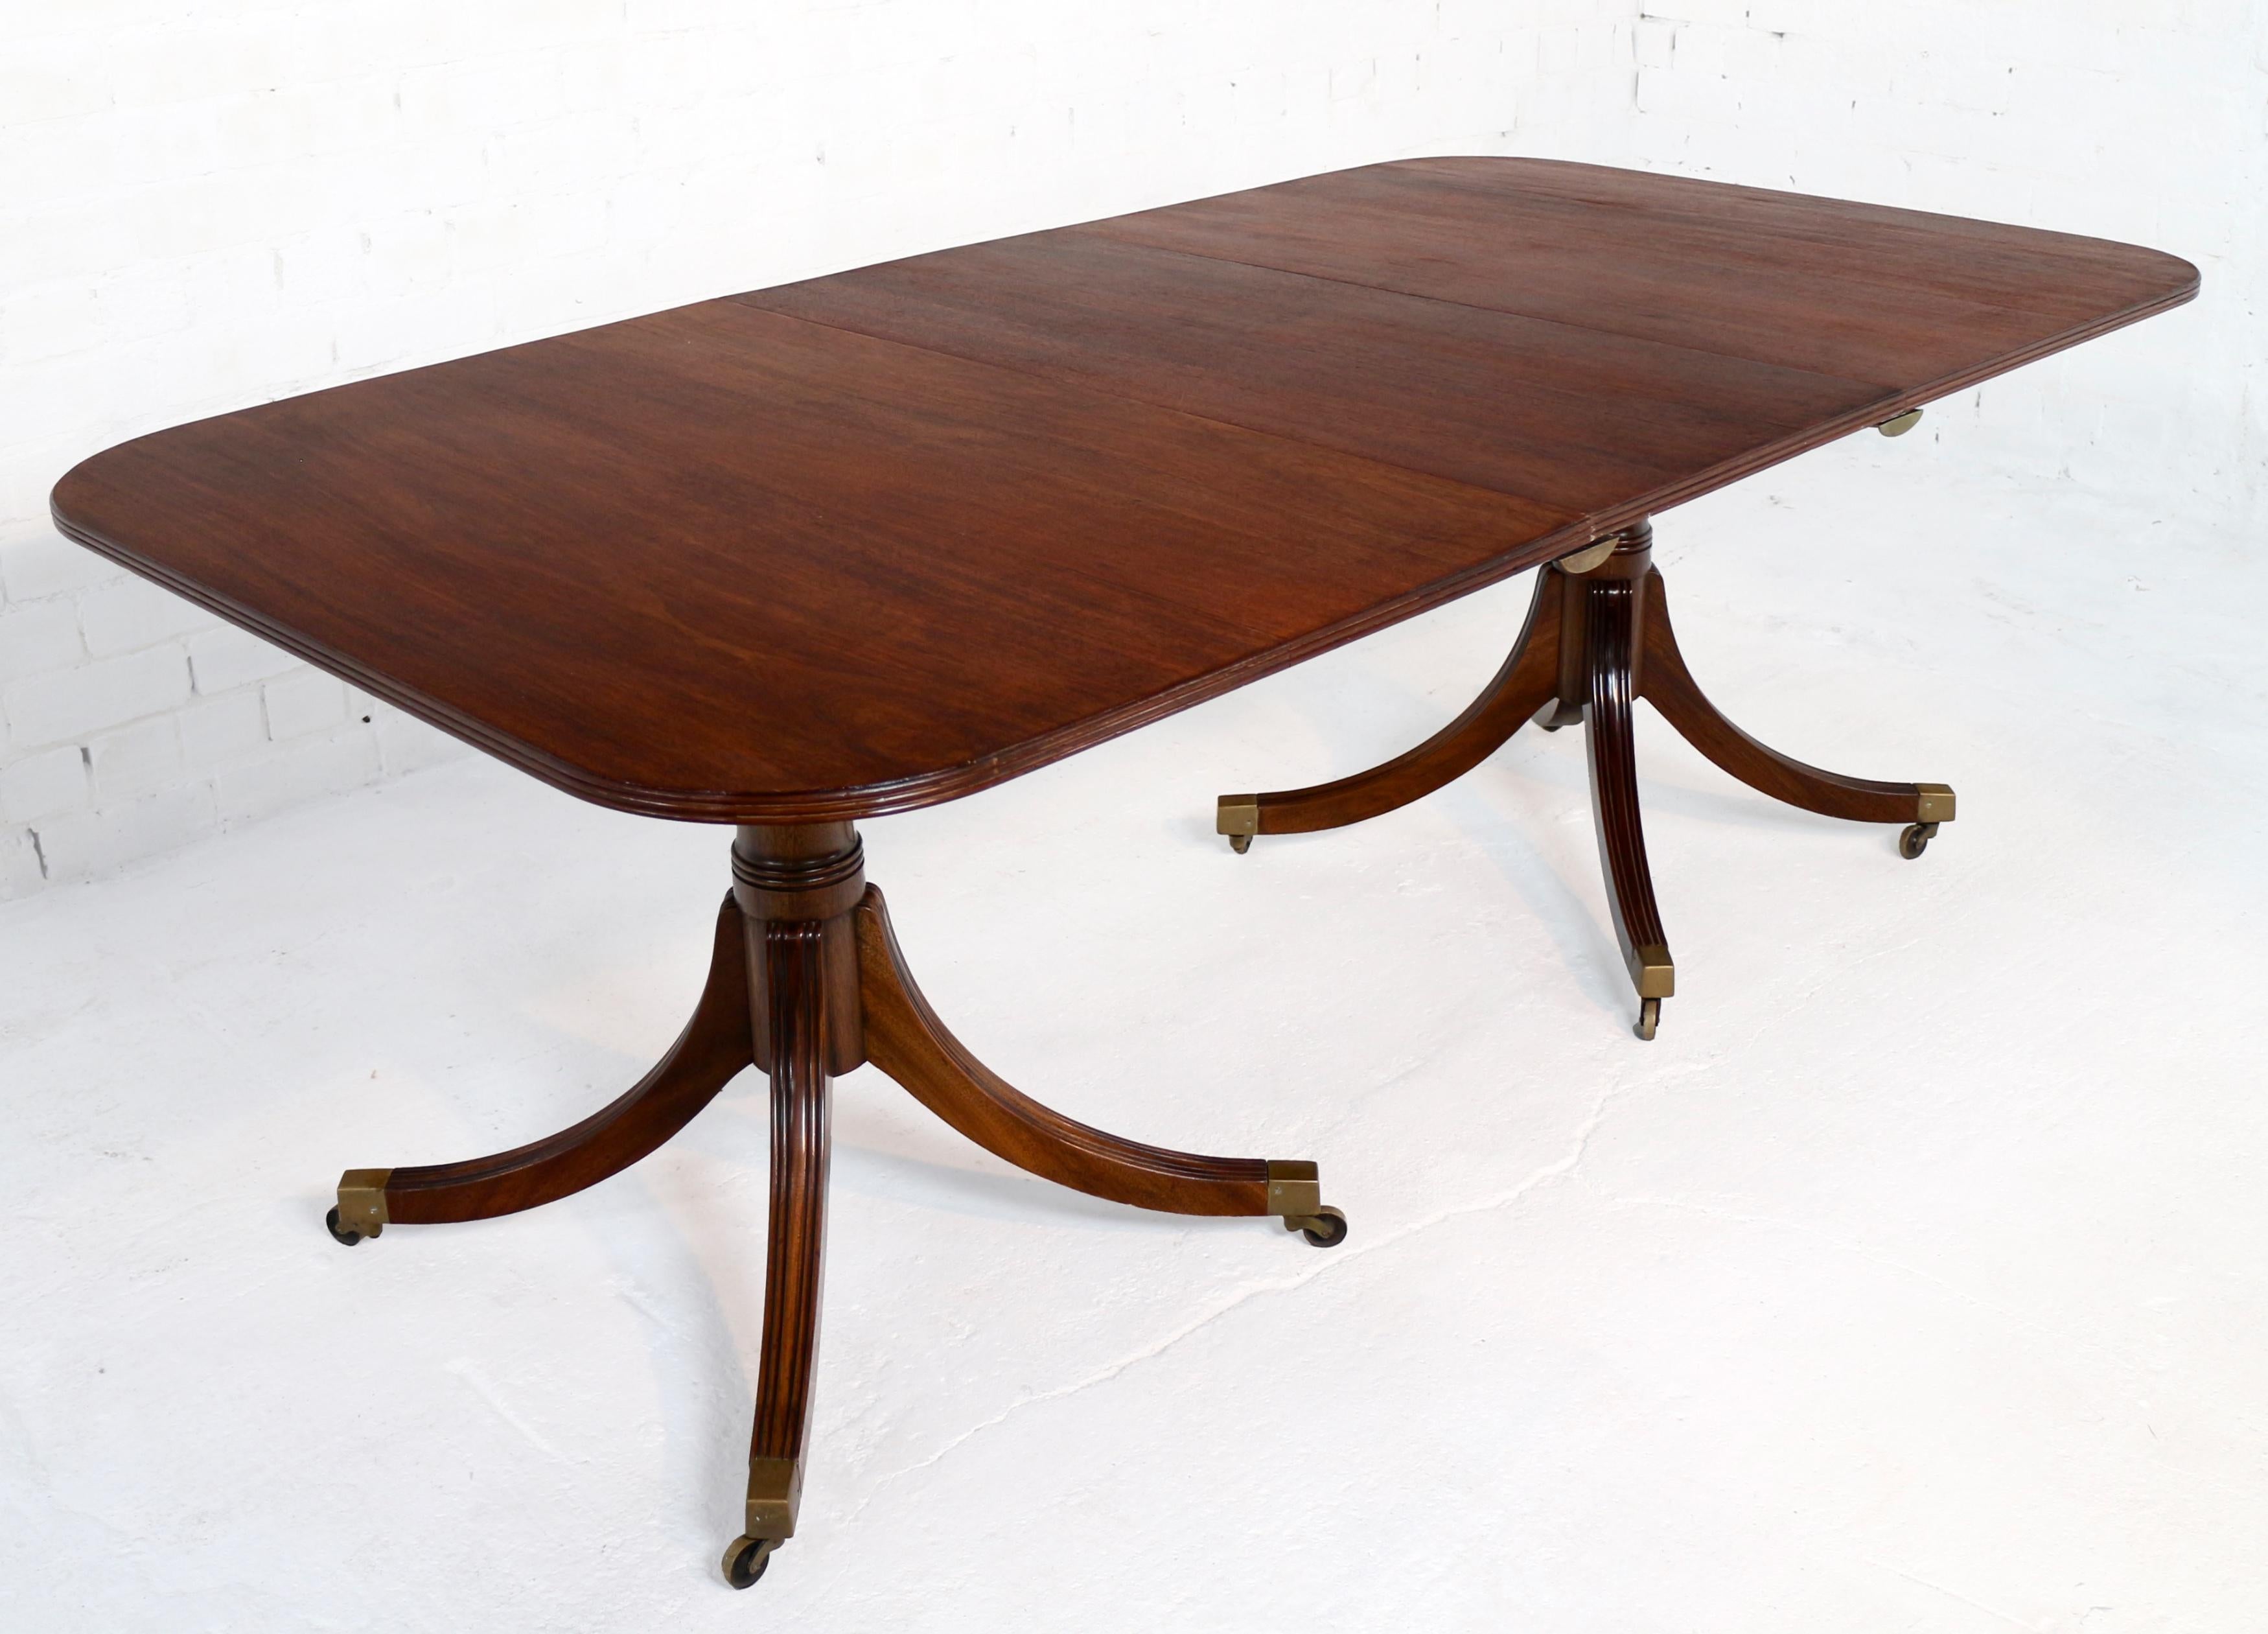 A twin pedestal solid mahogany extending dining table in the Regency taste, English and probably dating to the first half of the 20th century. This lovely examples has the more desirable & stable four legs to the pedestals and can seat up to 8 with